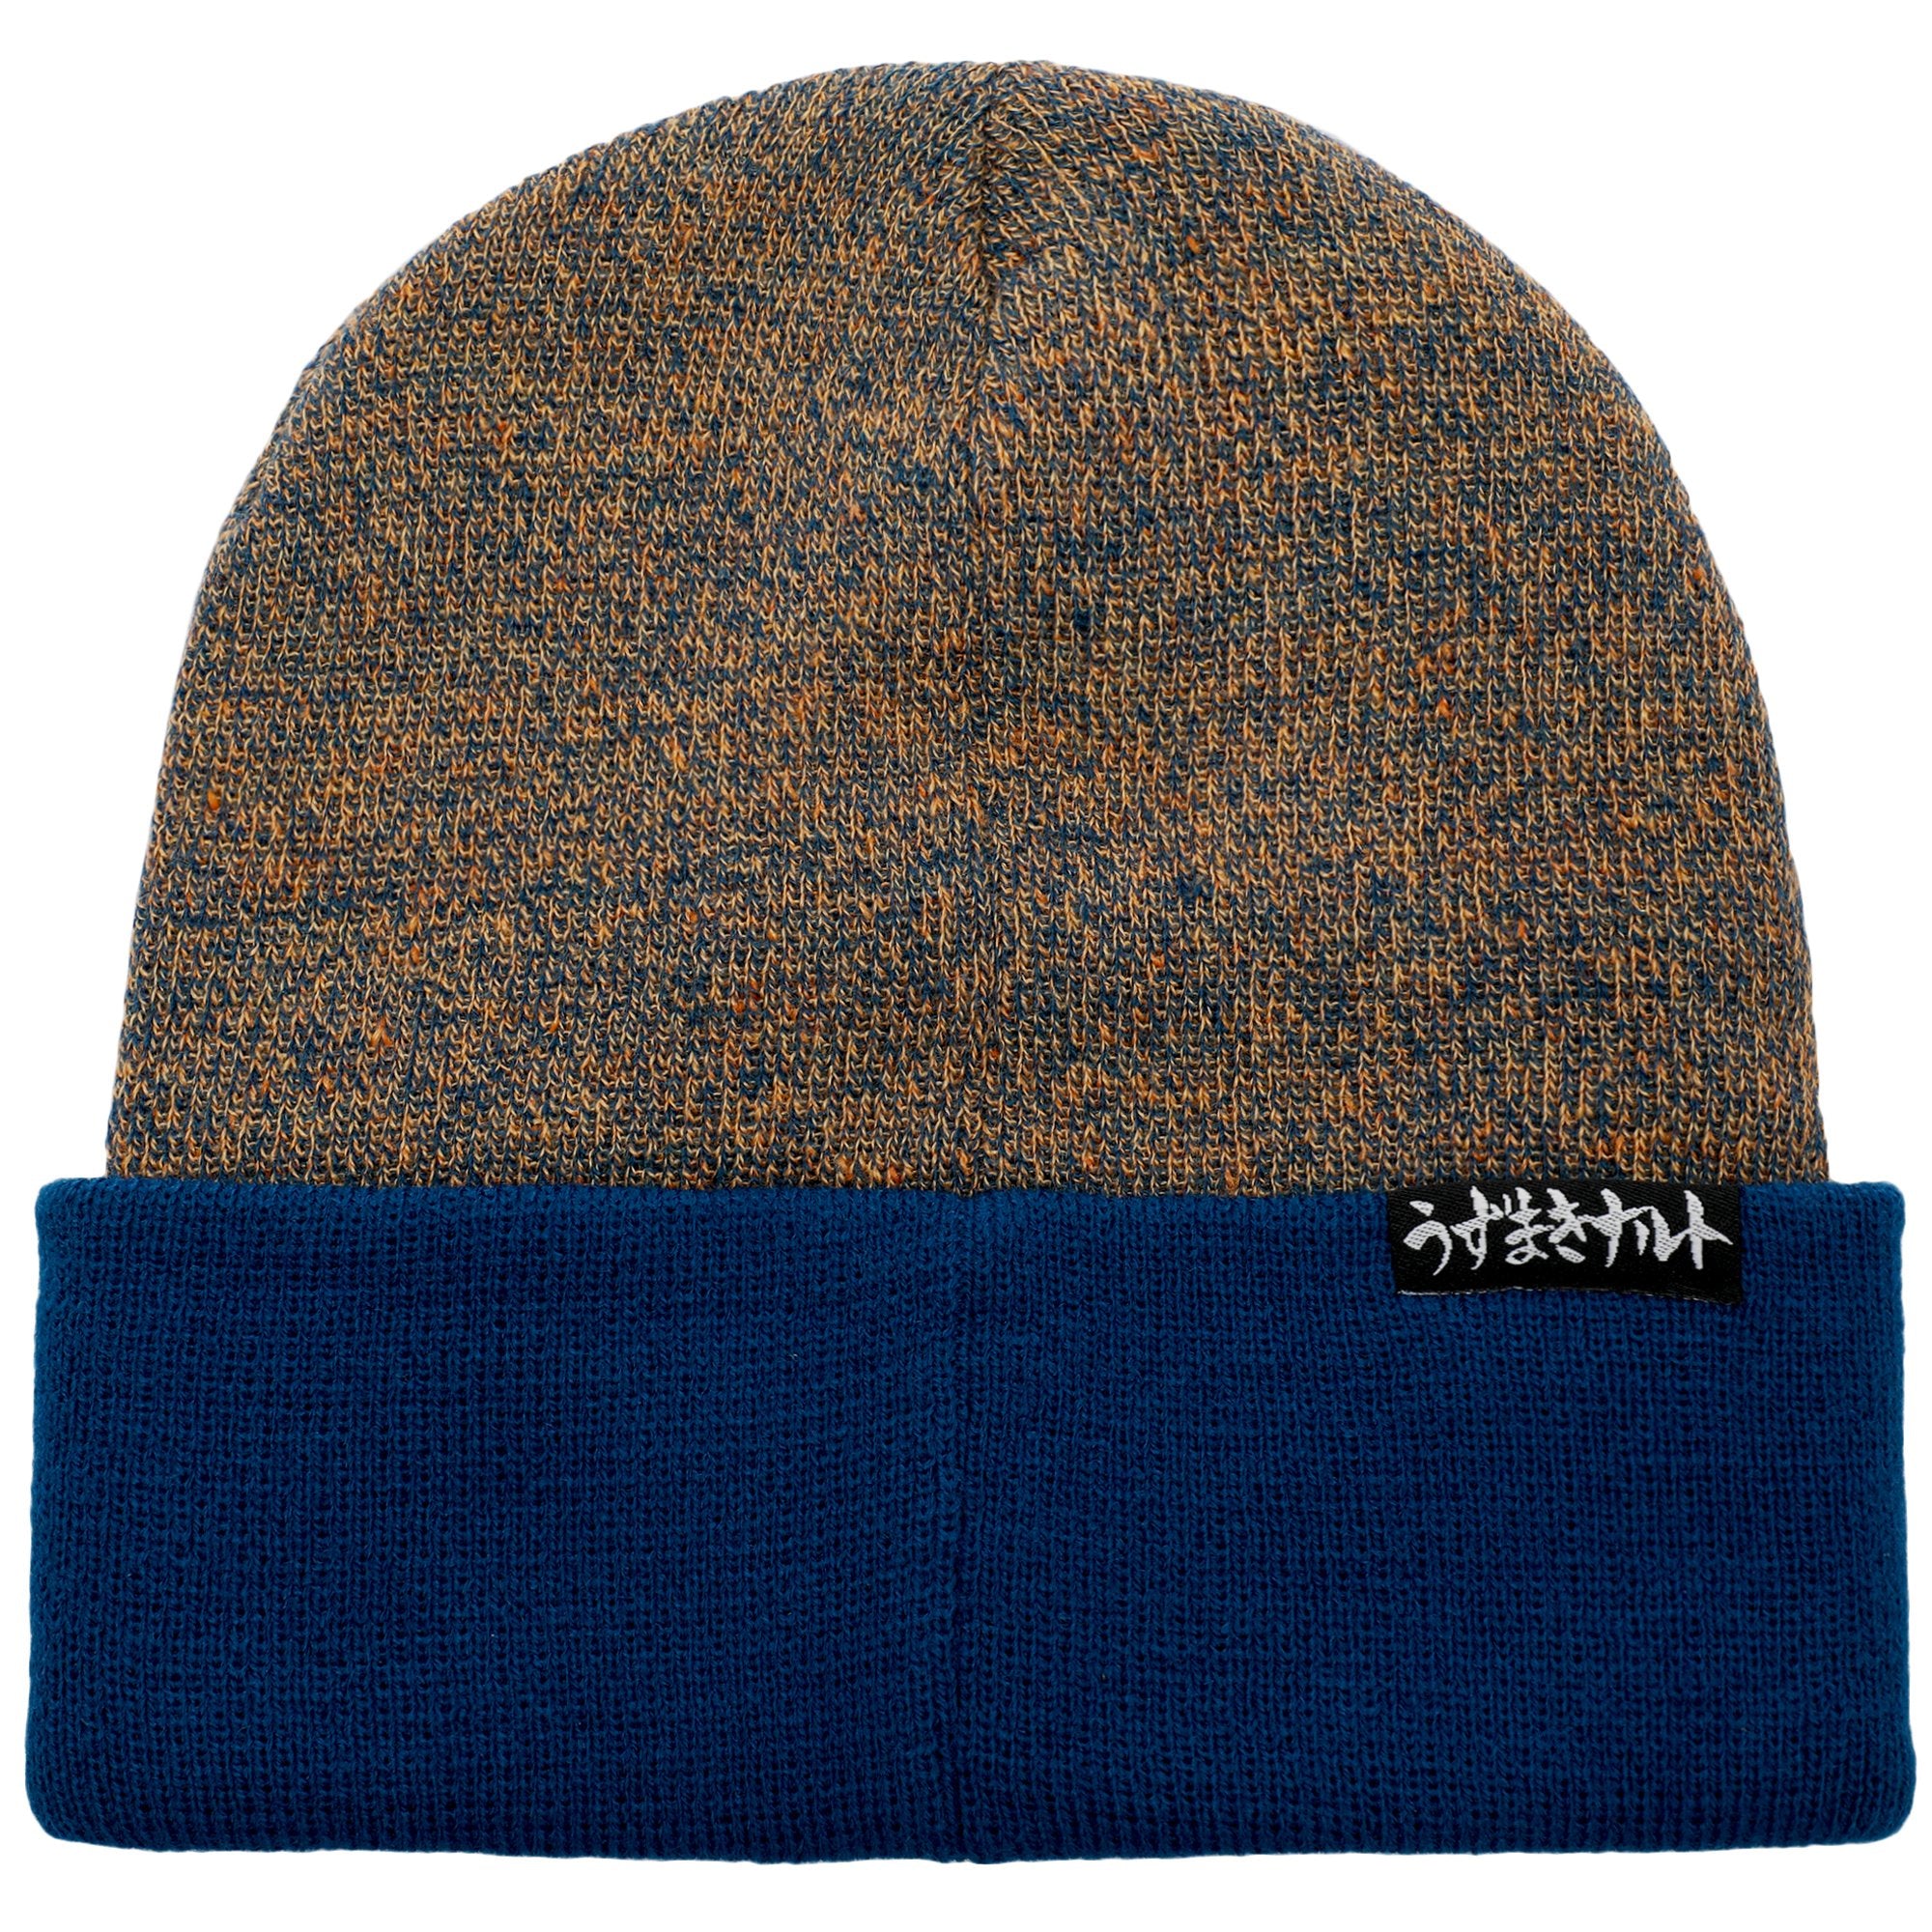 Naruto - Ramen Patch Beanie image count 1